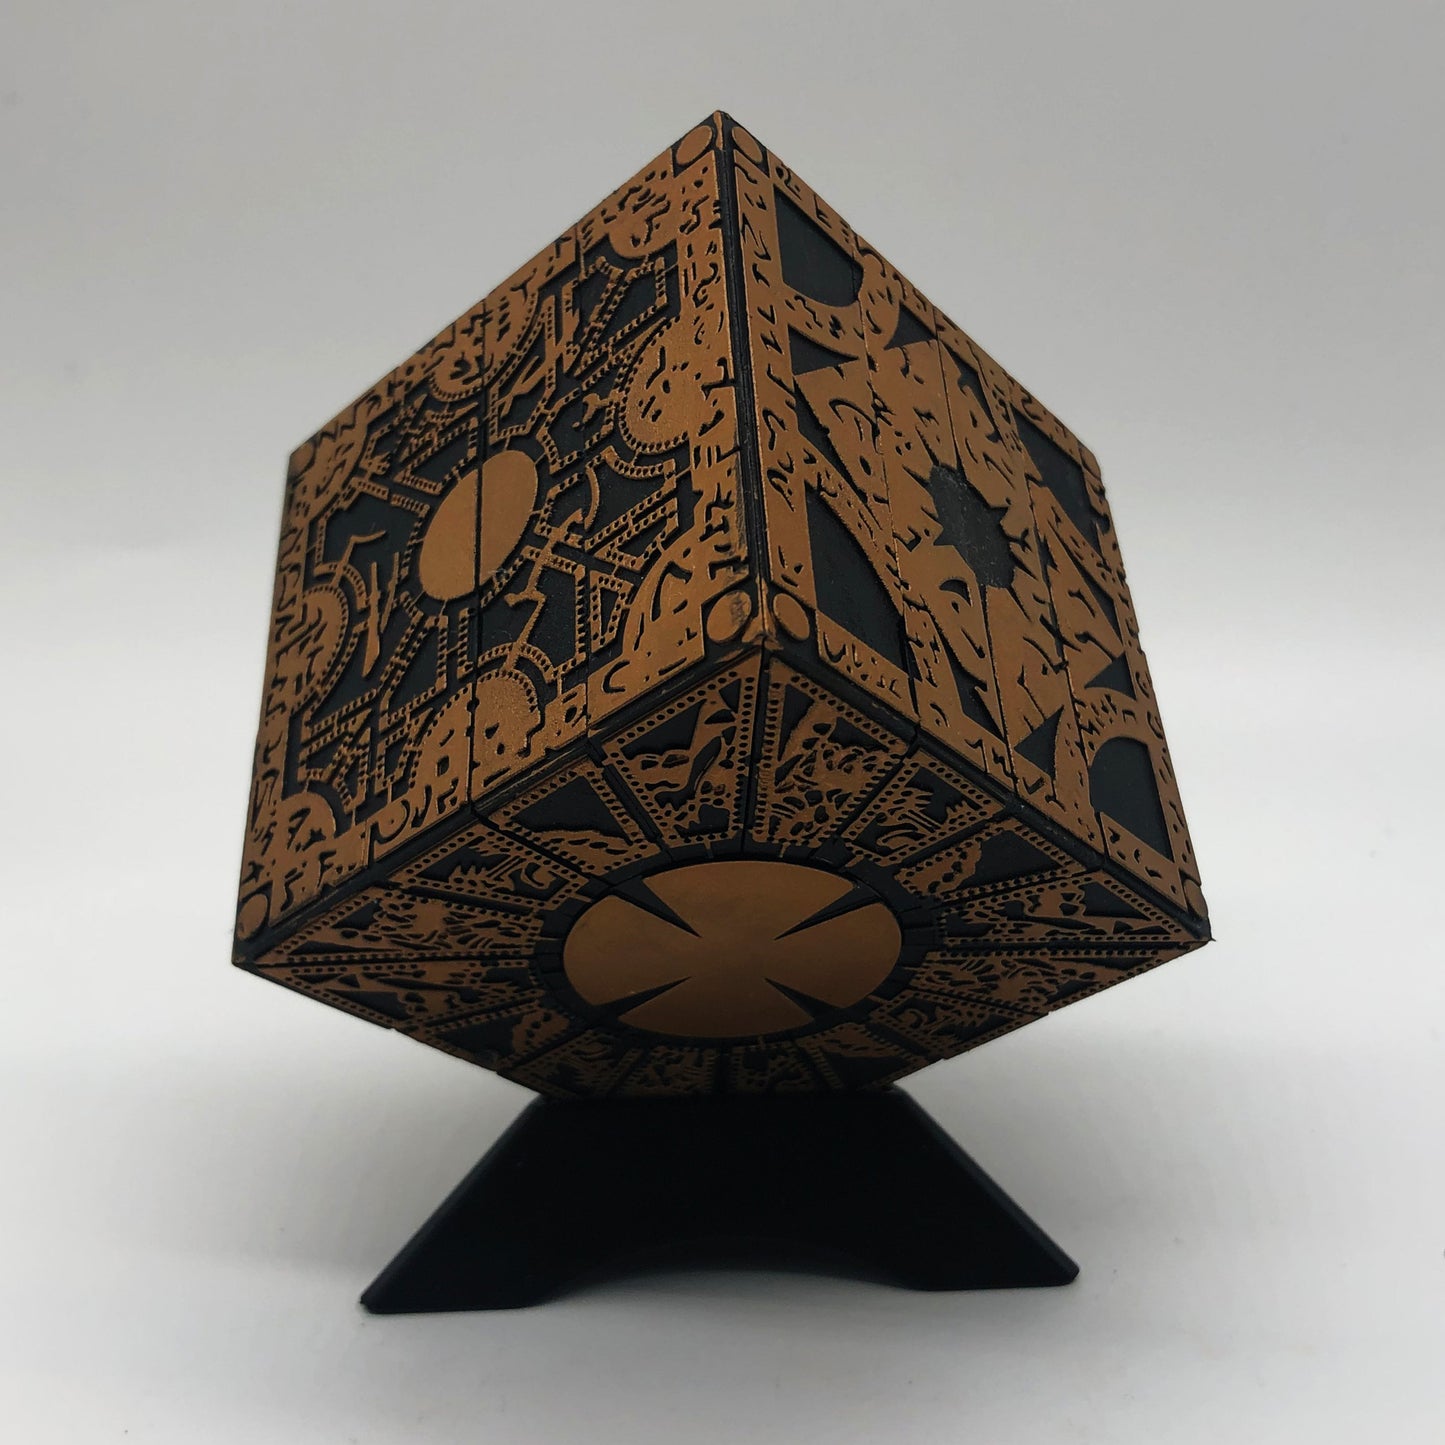 Hellraiser Puzzle Box on stand